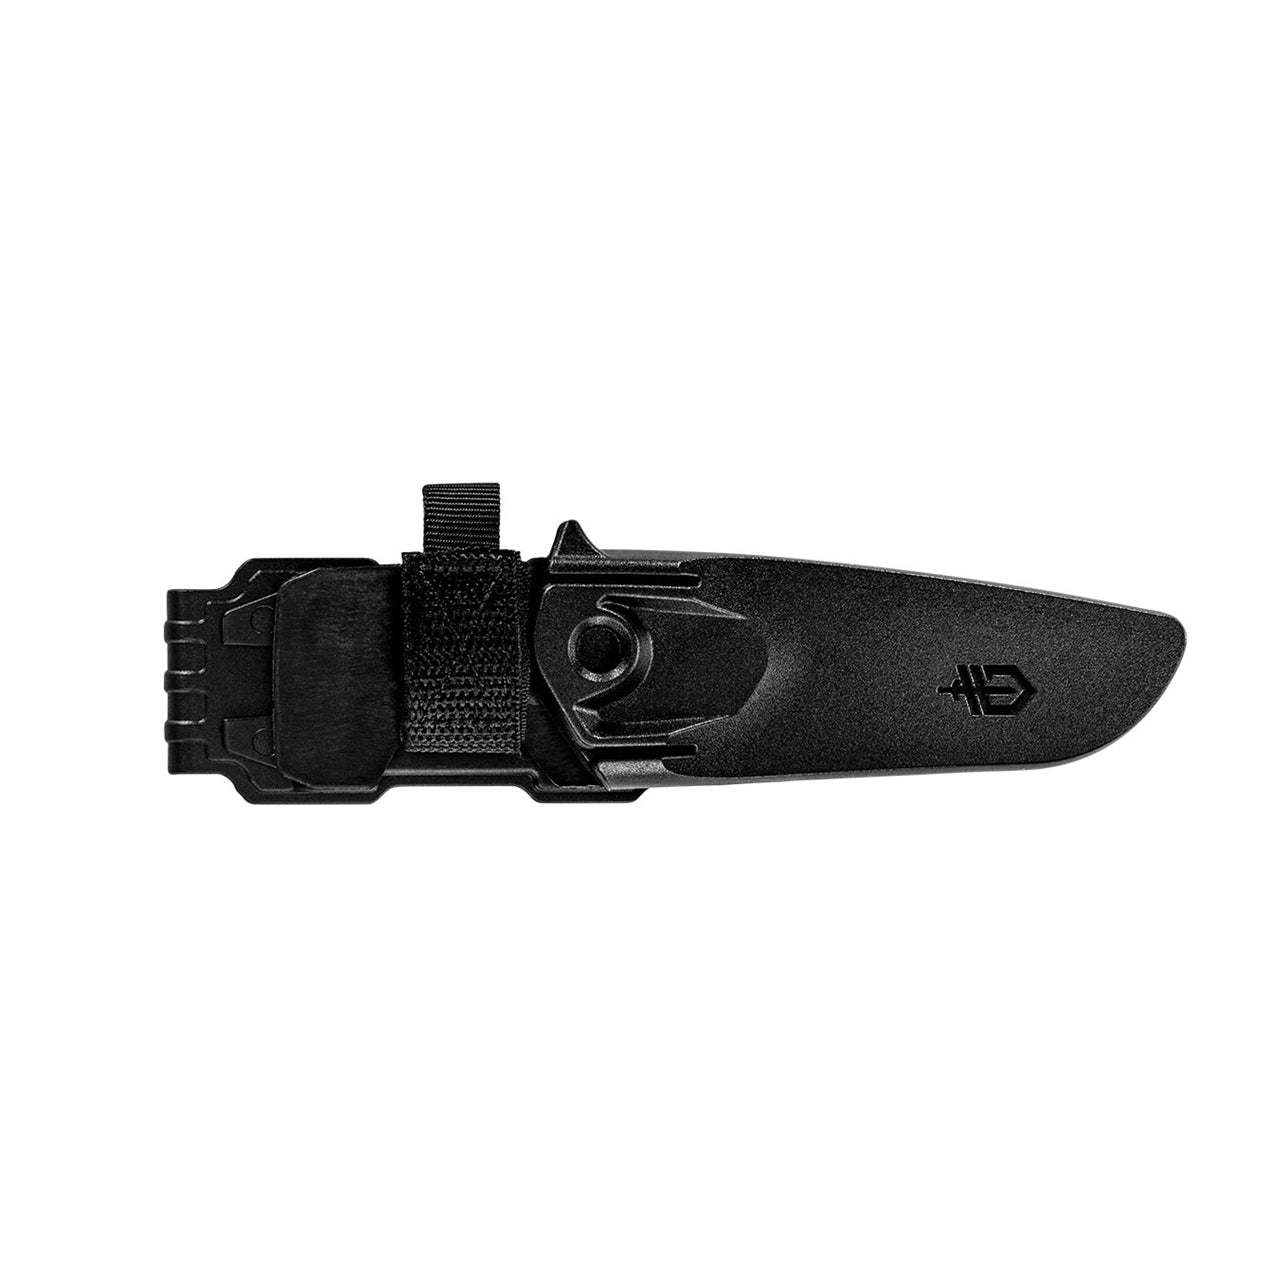 gerber bushcraft fixed blade custom knife for sale in houston texas at hawkes outdoors 2102512882